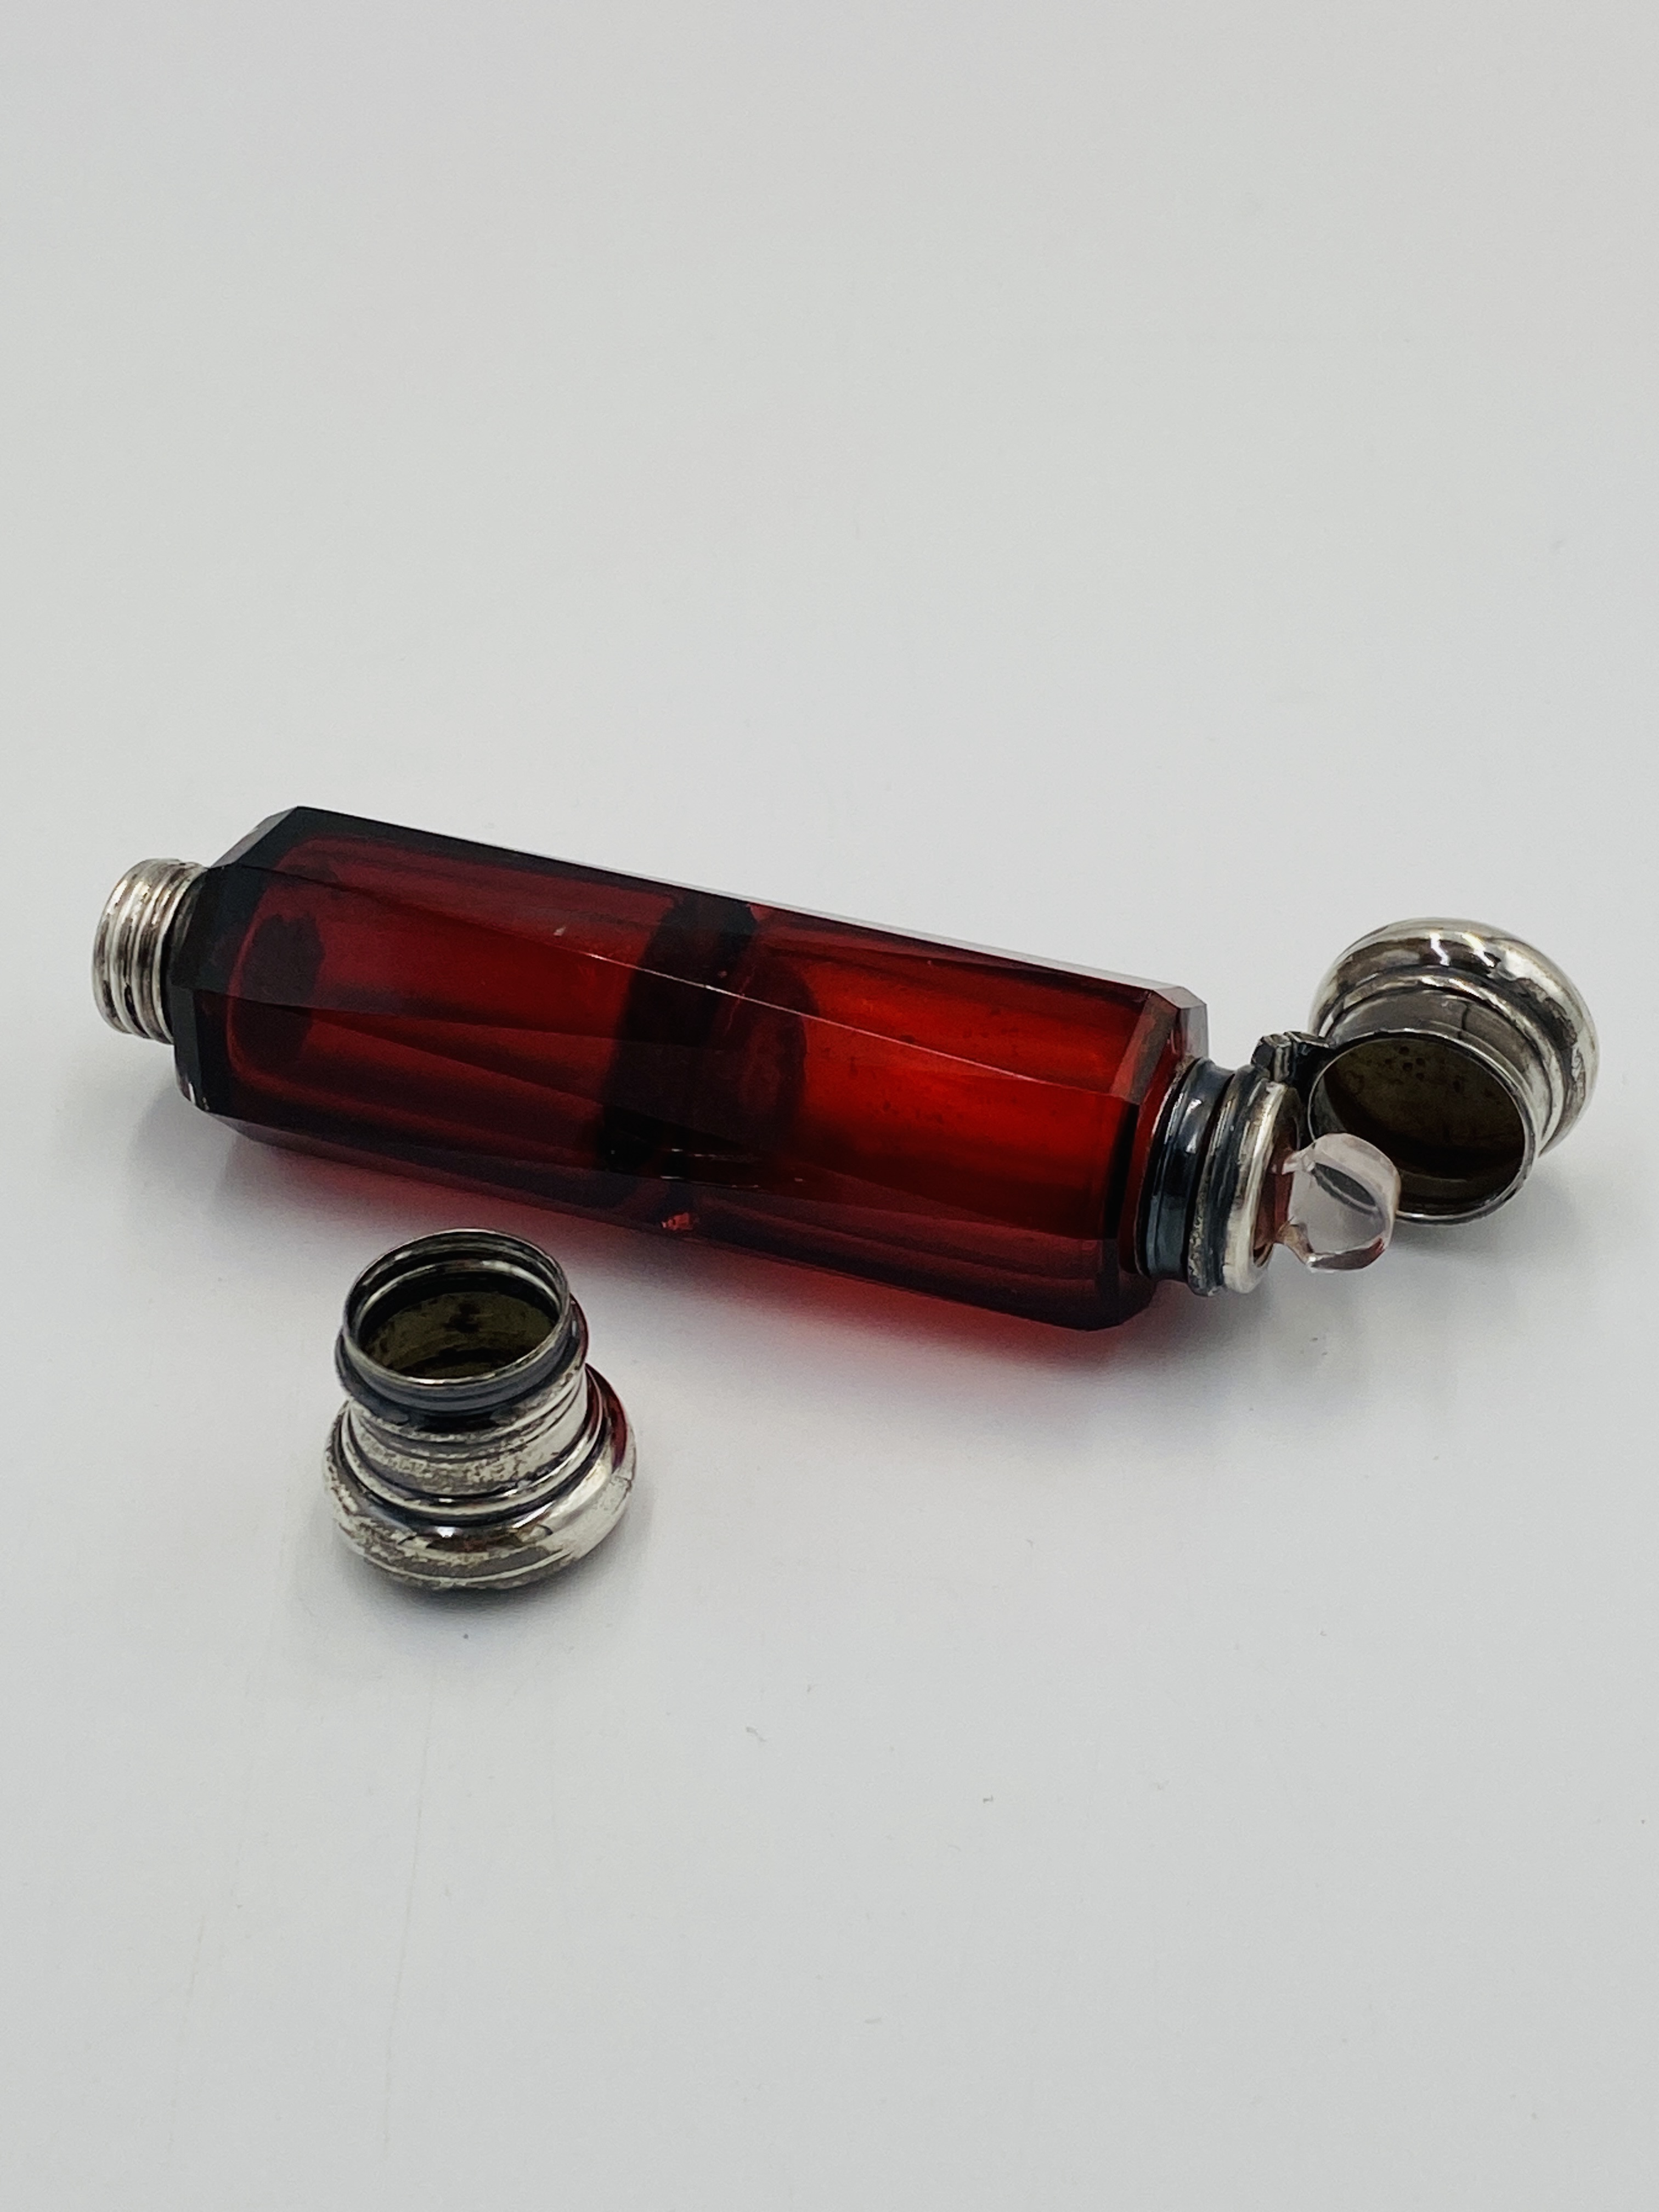 Ruby glass double ended perfume bottle with white metal tops - Image 3 of 5